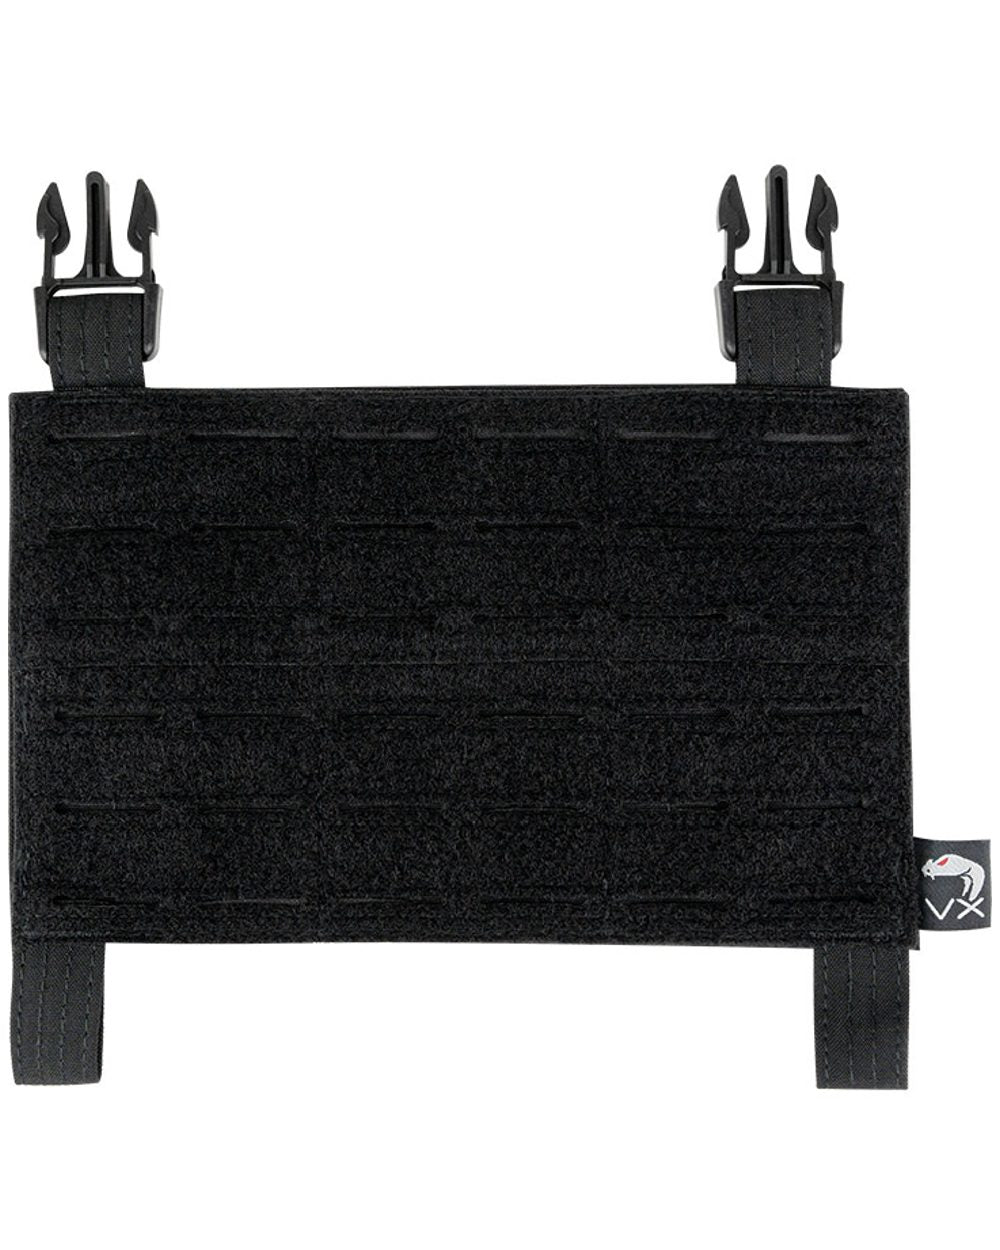 Viper VX Buckle Up Panel in Black 